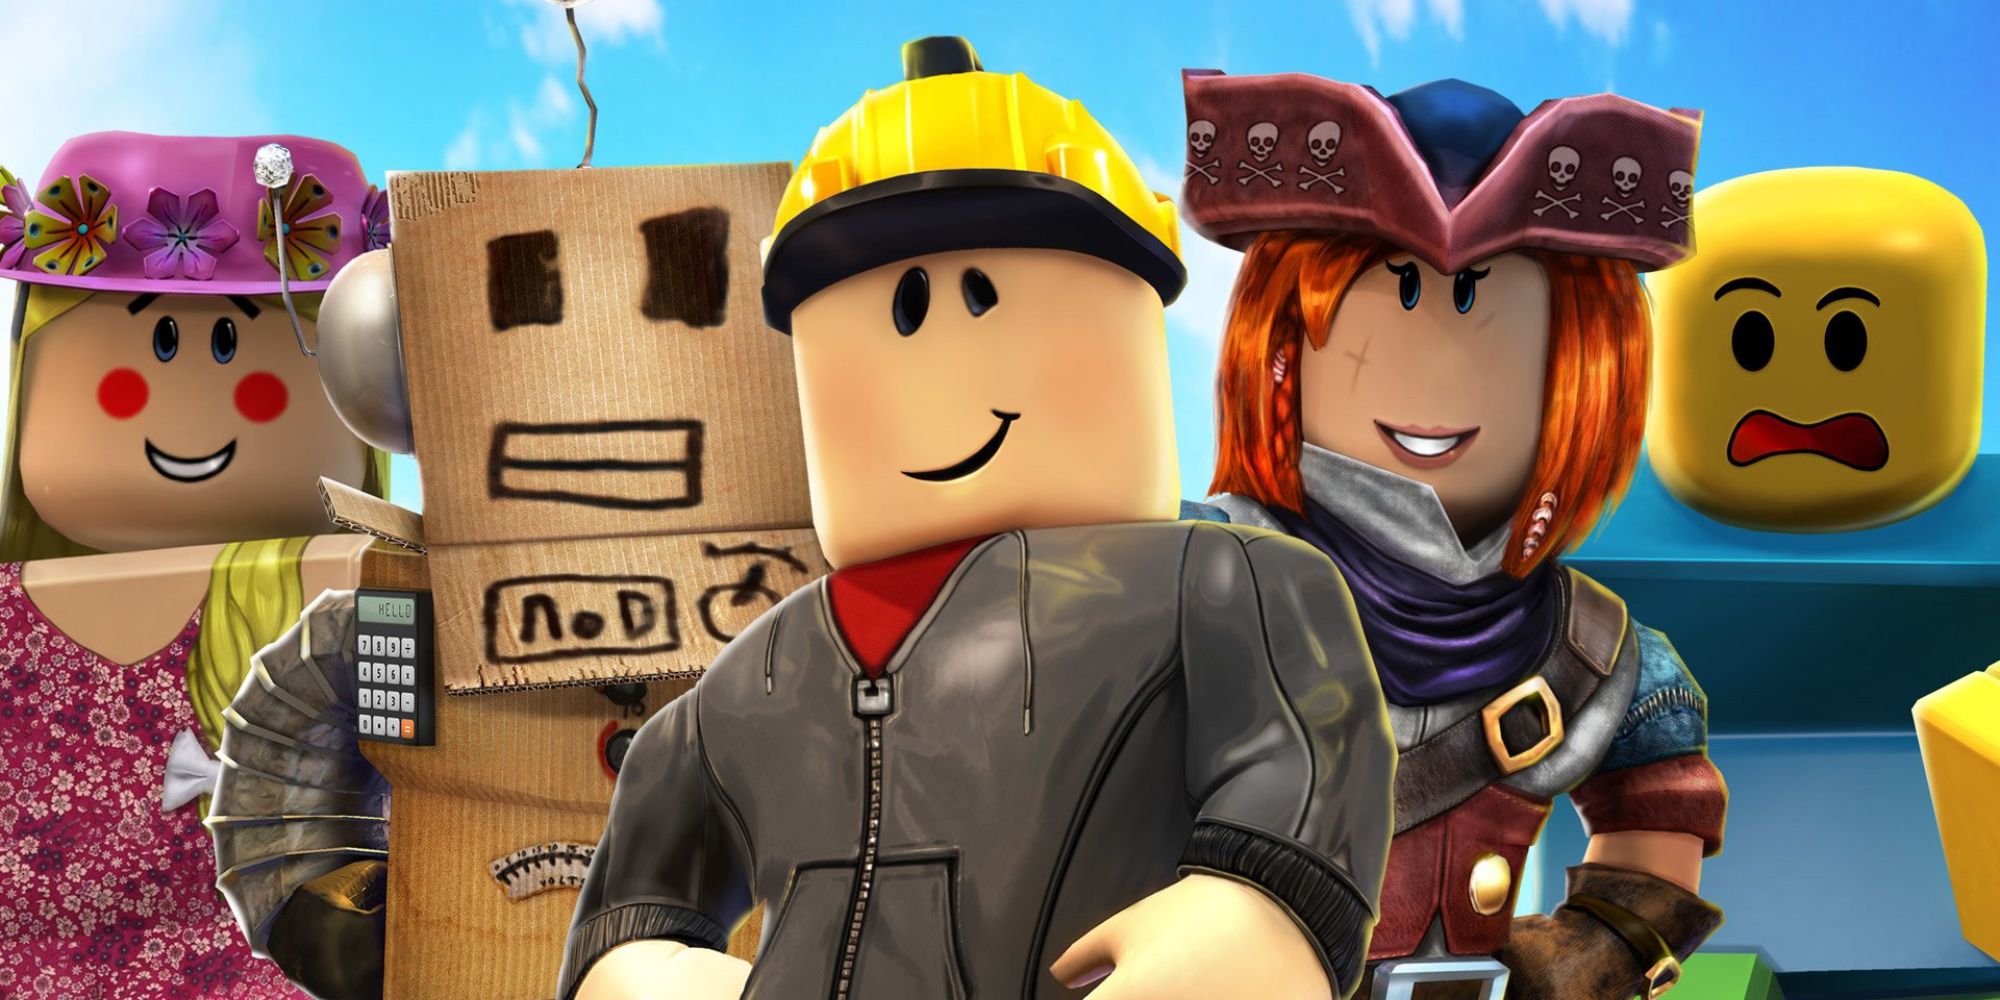 OOF: Roblox Has Removed the Famous Oof Sound - POPSUGAR Australia